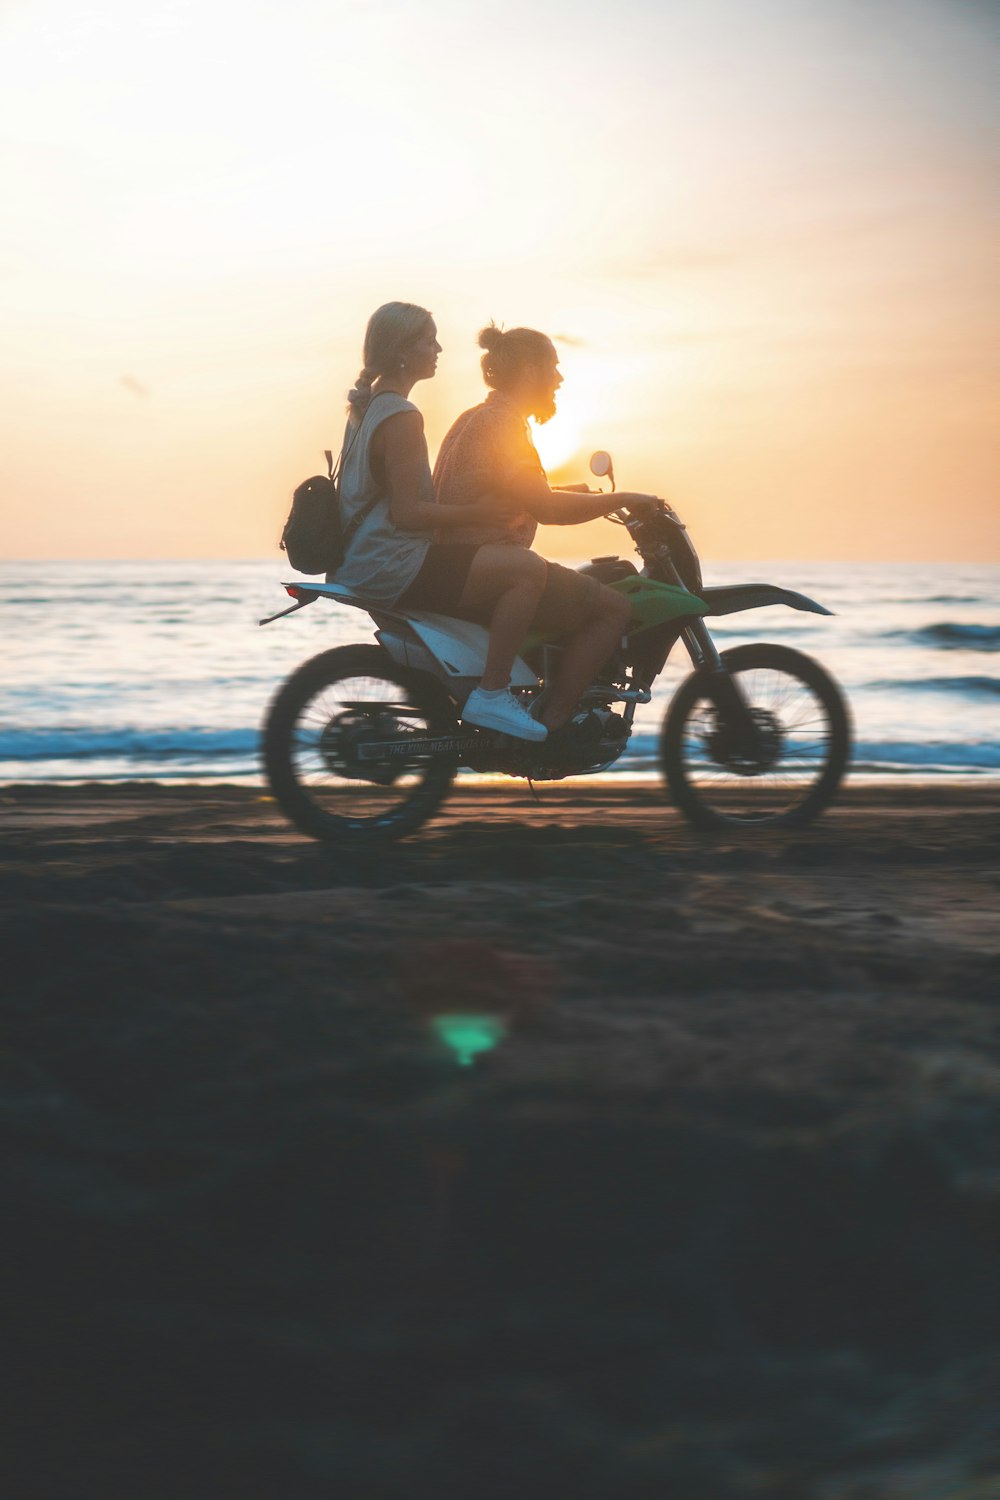 man and woman riding on motorcycle